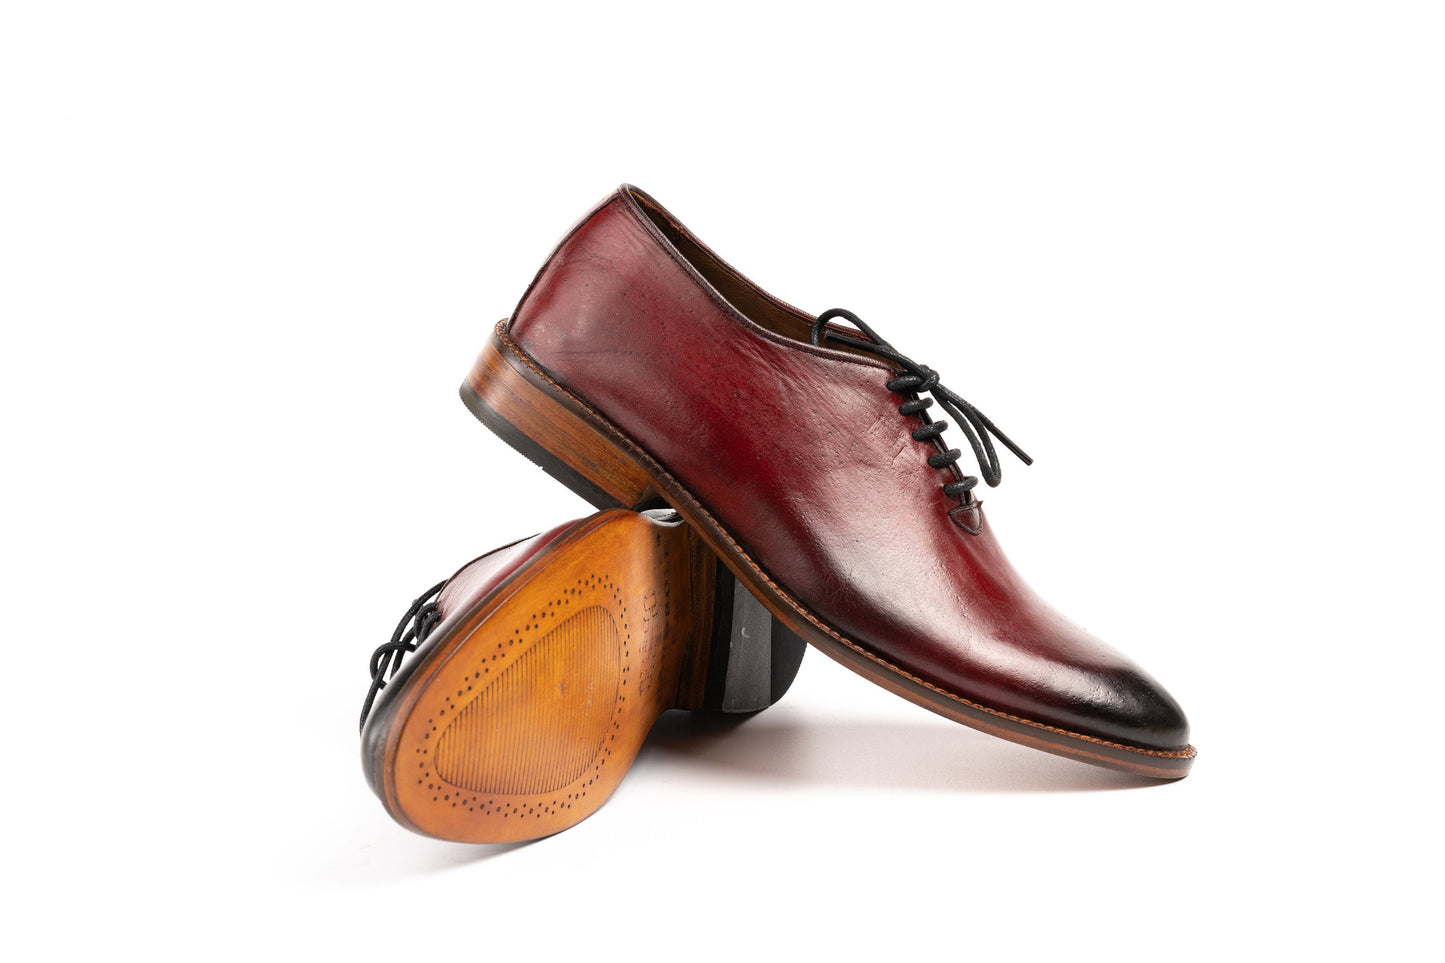 Red Wholecut Oxford Shoes Hand Welted Real Crust Leather Luxury Shoes Made To Order Customized Formal Shoes Suit Shoes Maroon Patina Shoes Woozy Store